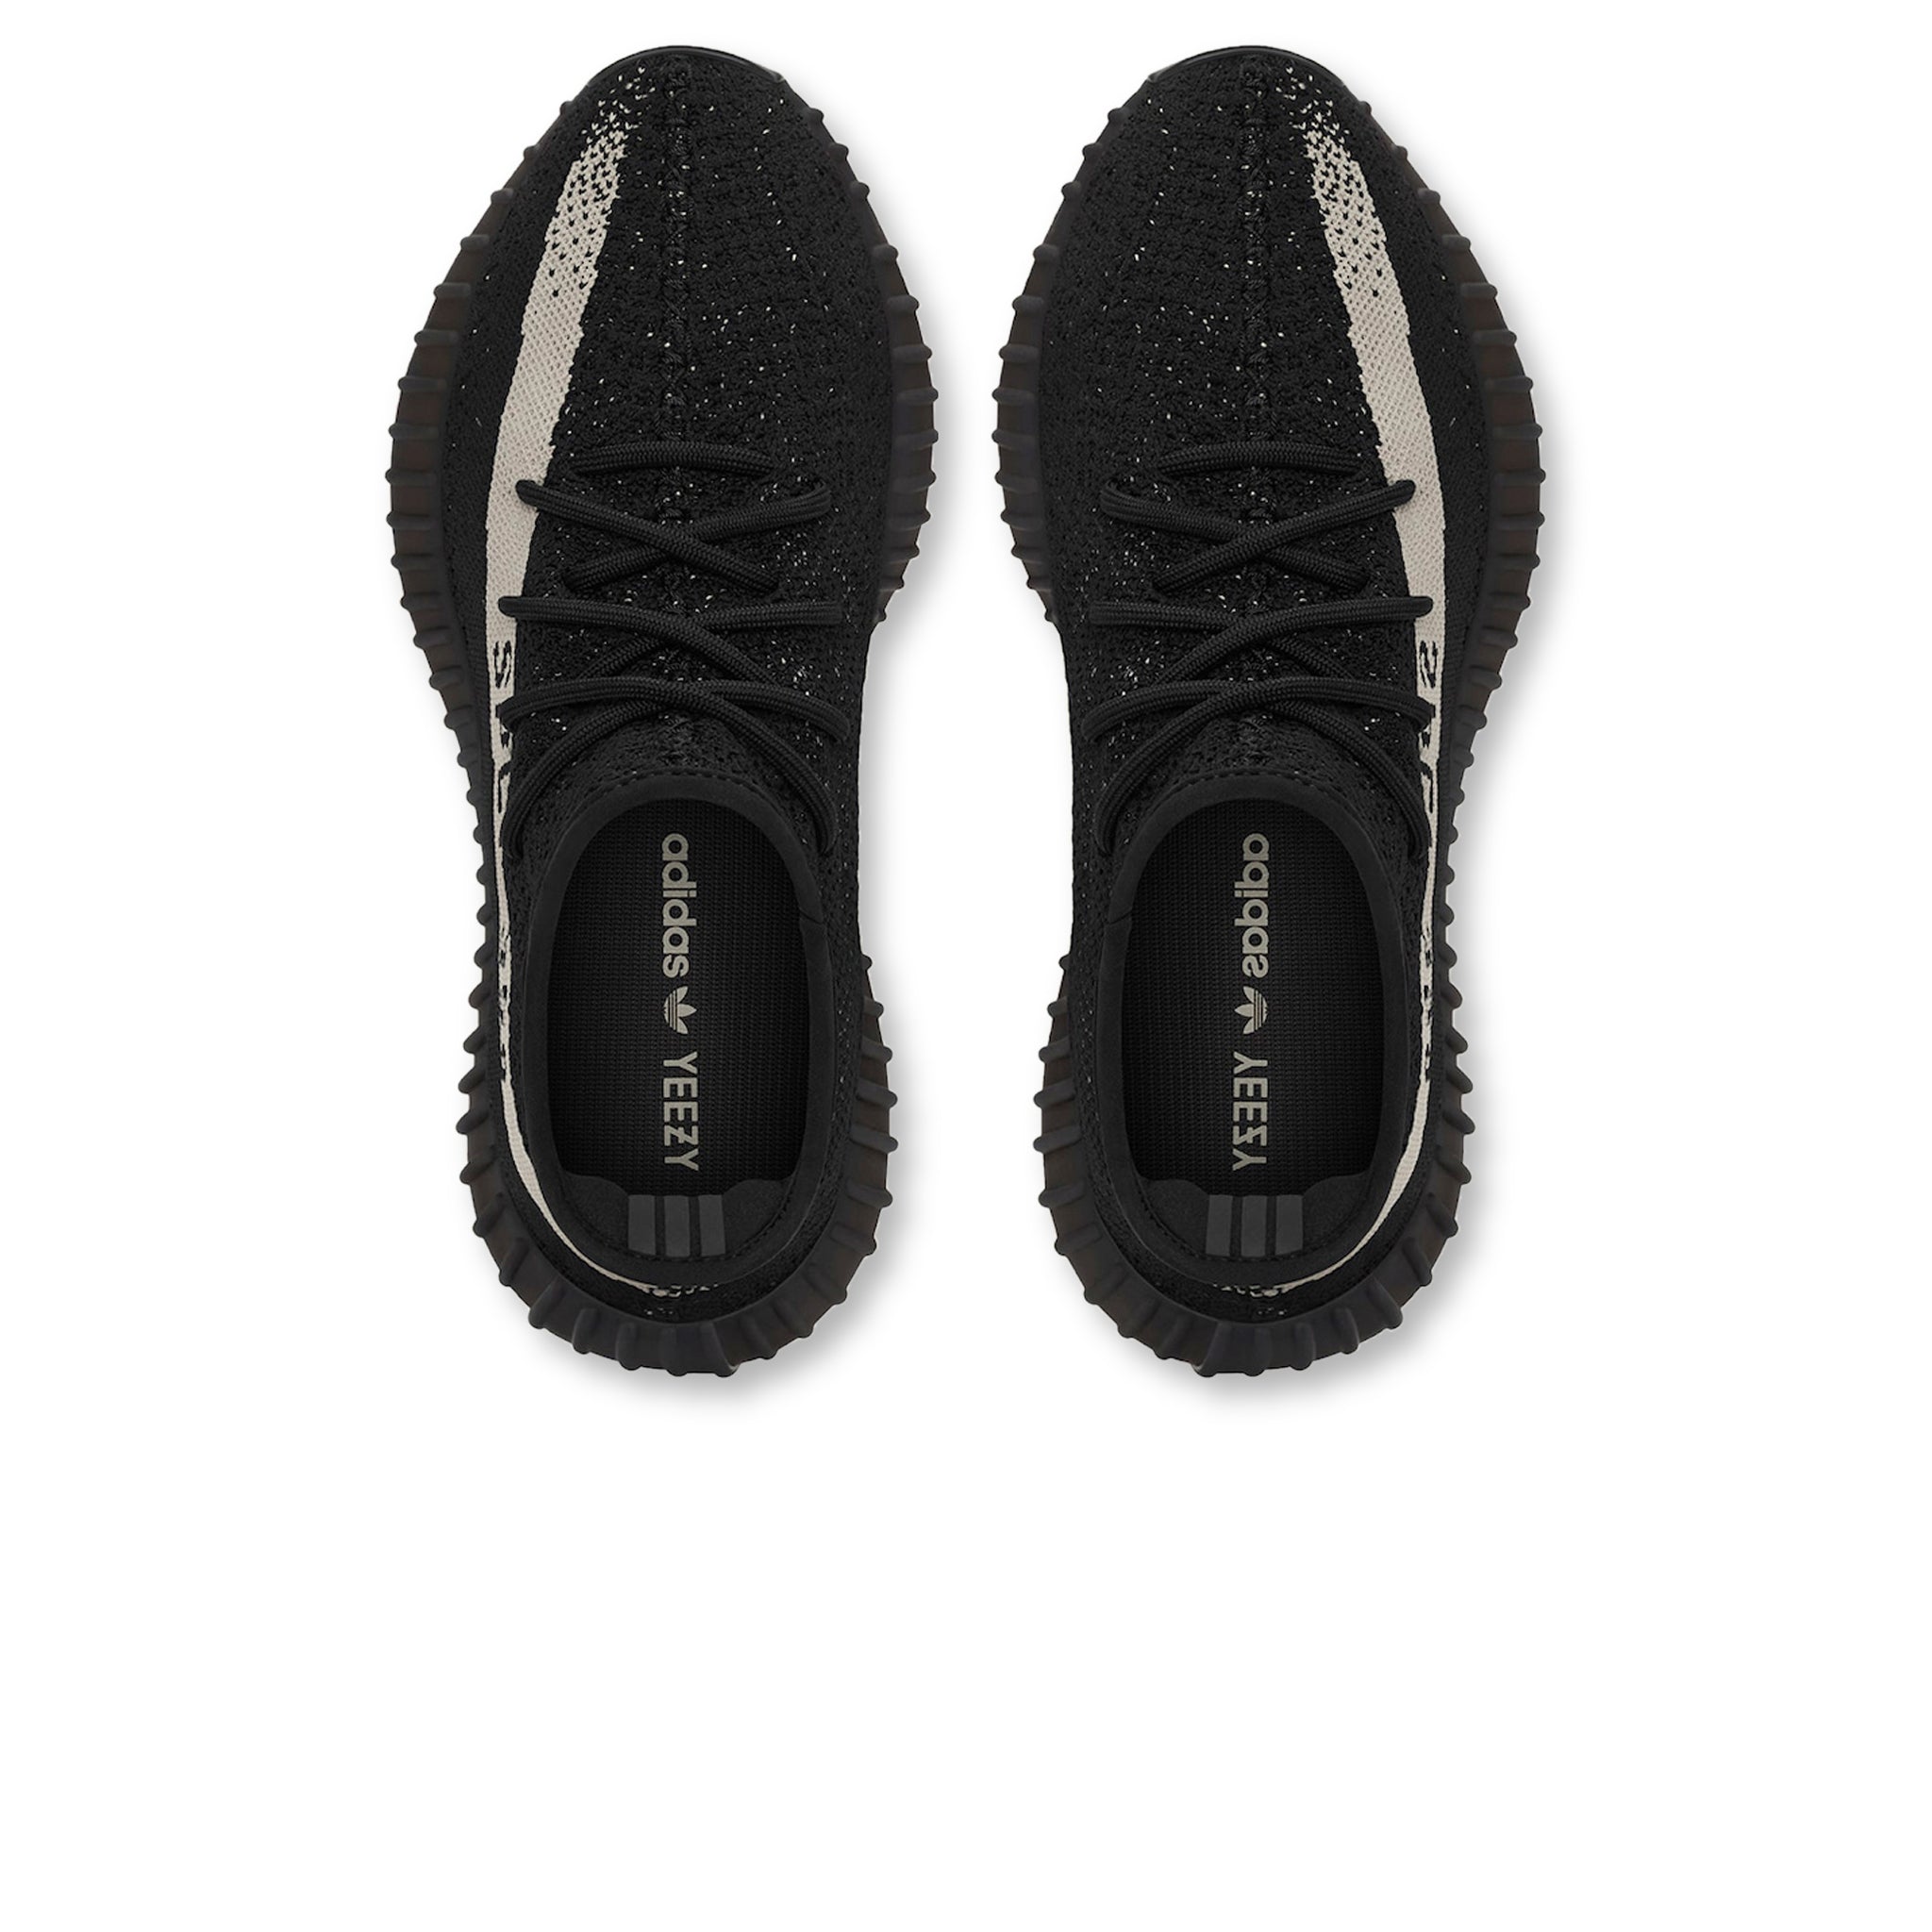 Top down view of Adidas Yeezy Boost 350 V2 Core Black White (Oreo) BY1604